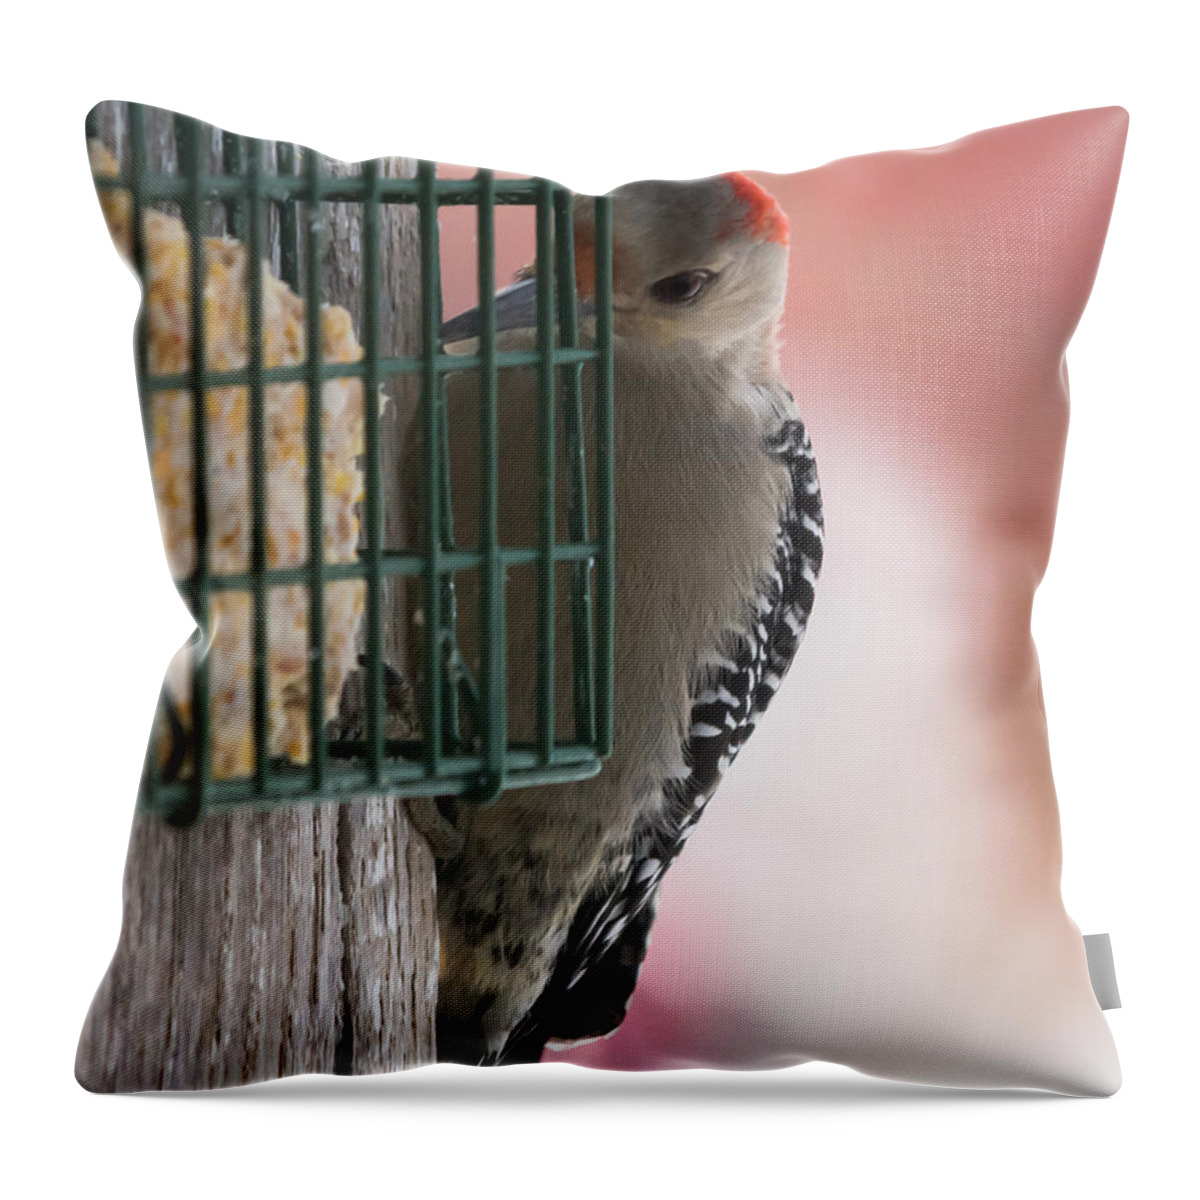 Woodpecker Throw Pillow featuring the photograph She's A Beauty by Holden The Moment